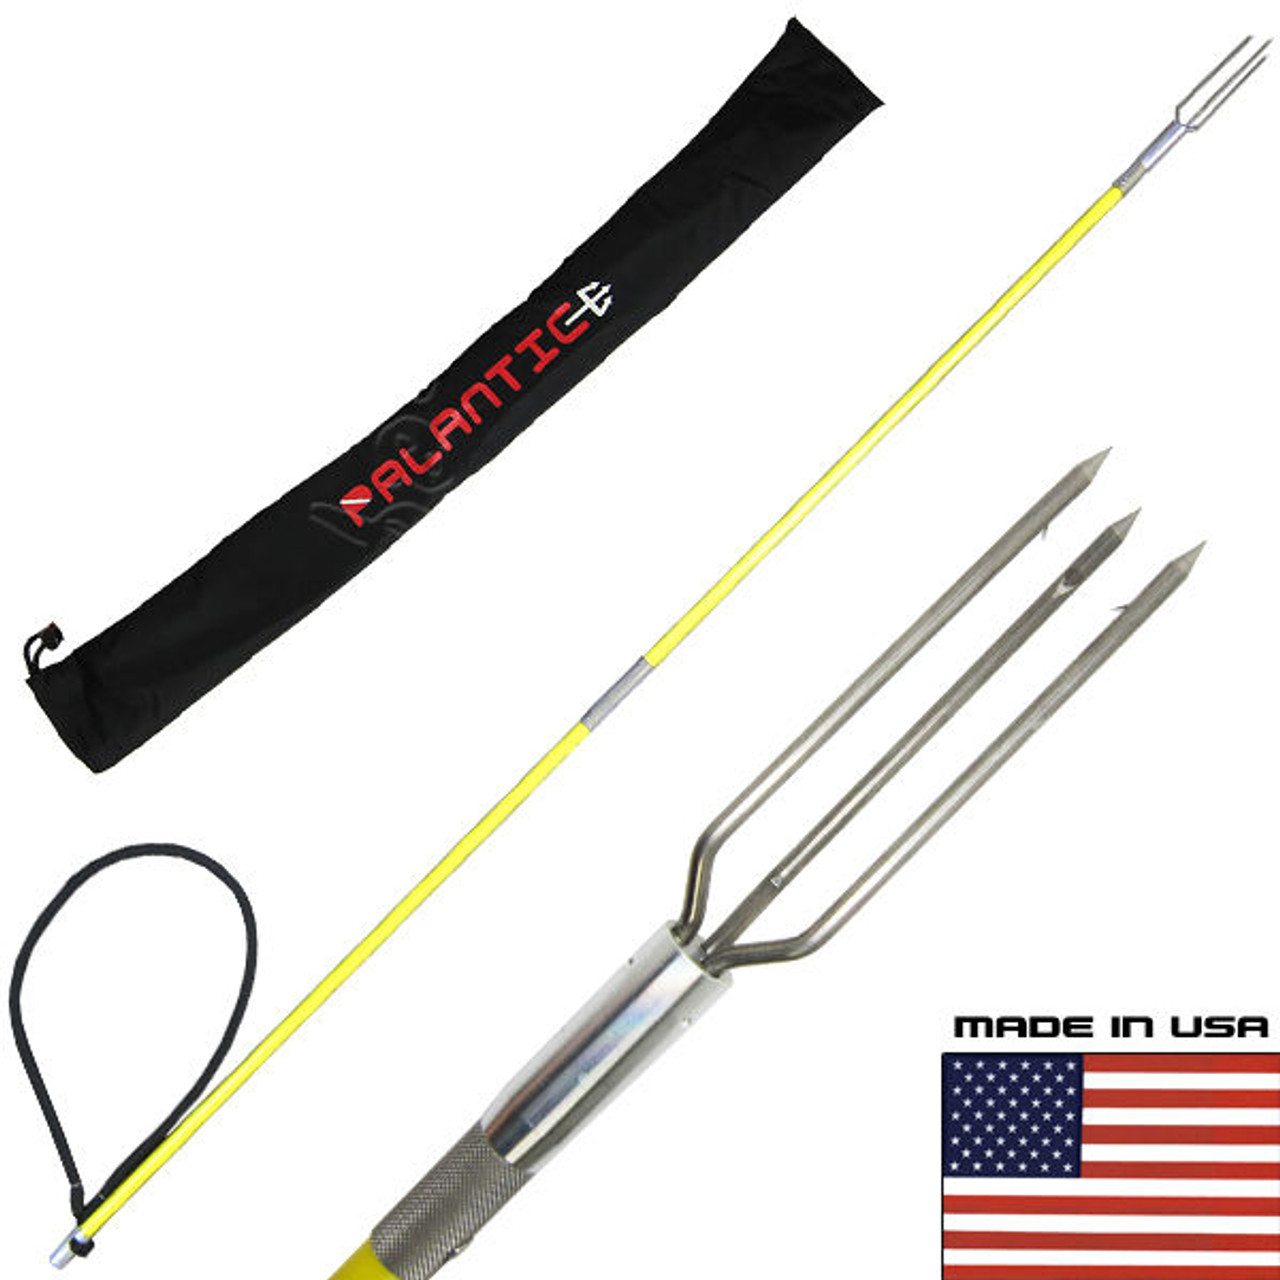 4.5' Travel Two Piece Spearfishing Fiber Glass Pole Spear w/ Lionfish Tip &  Bag - scubachoice